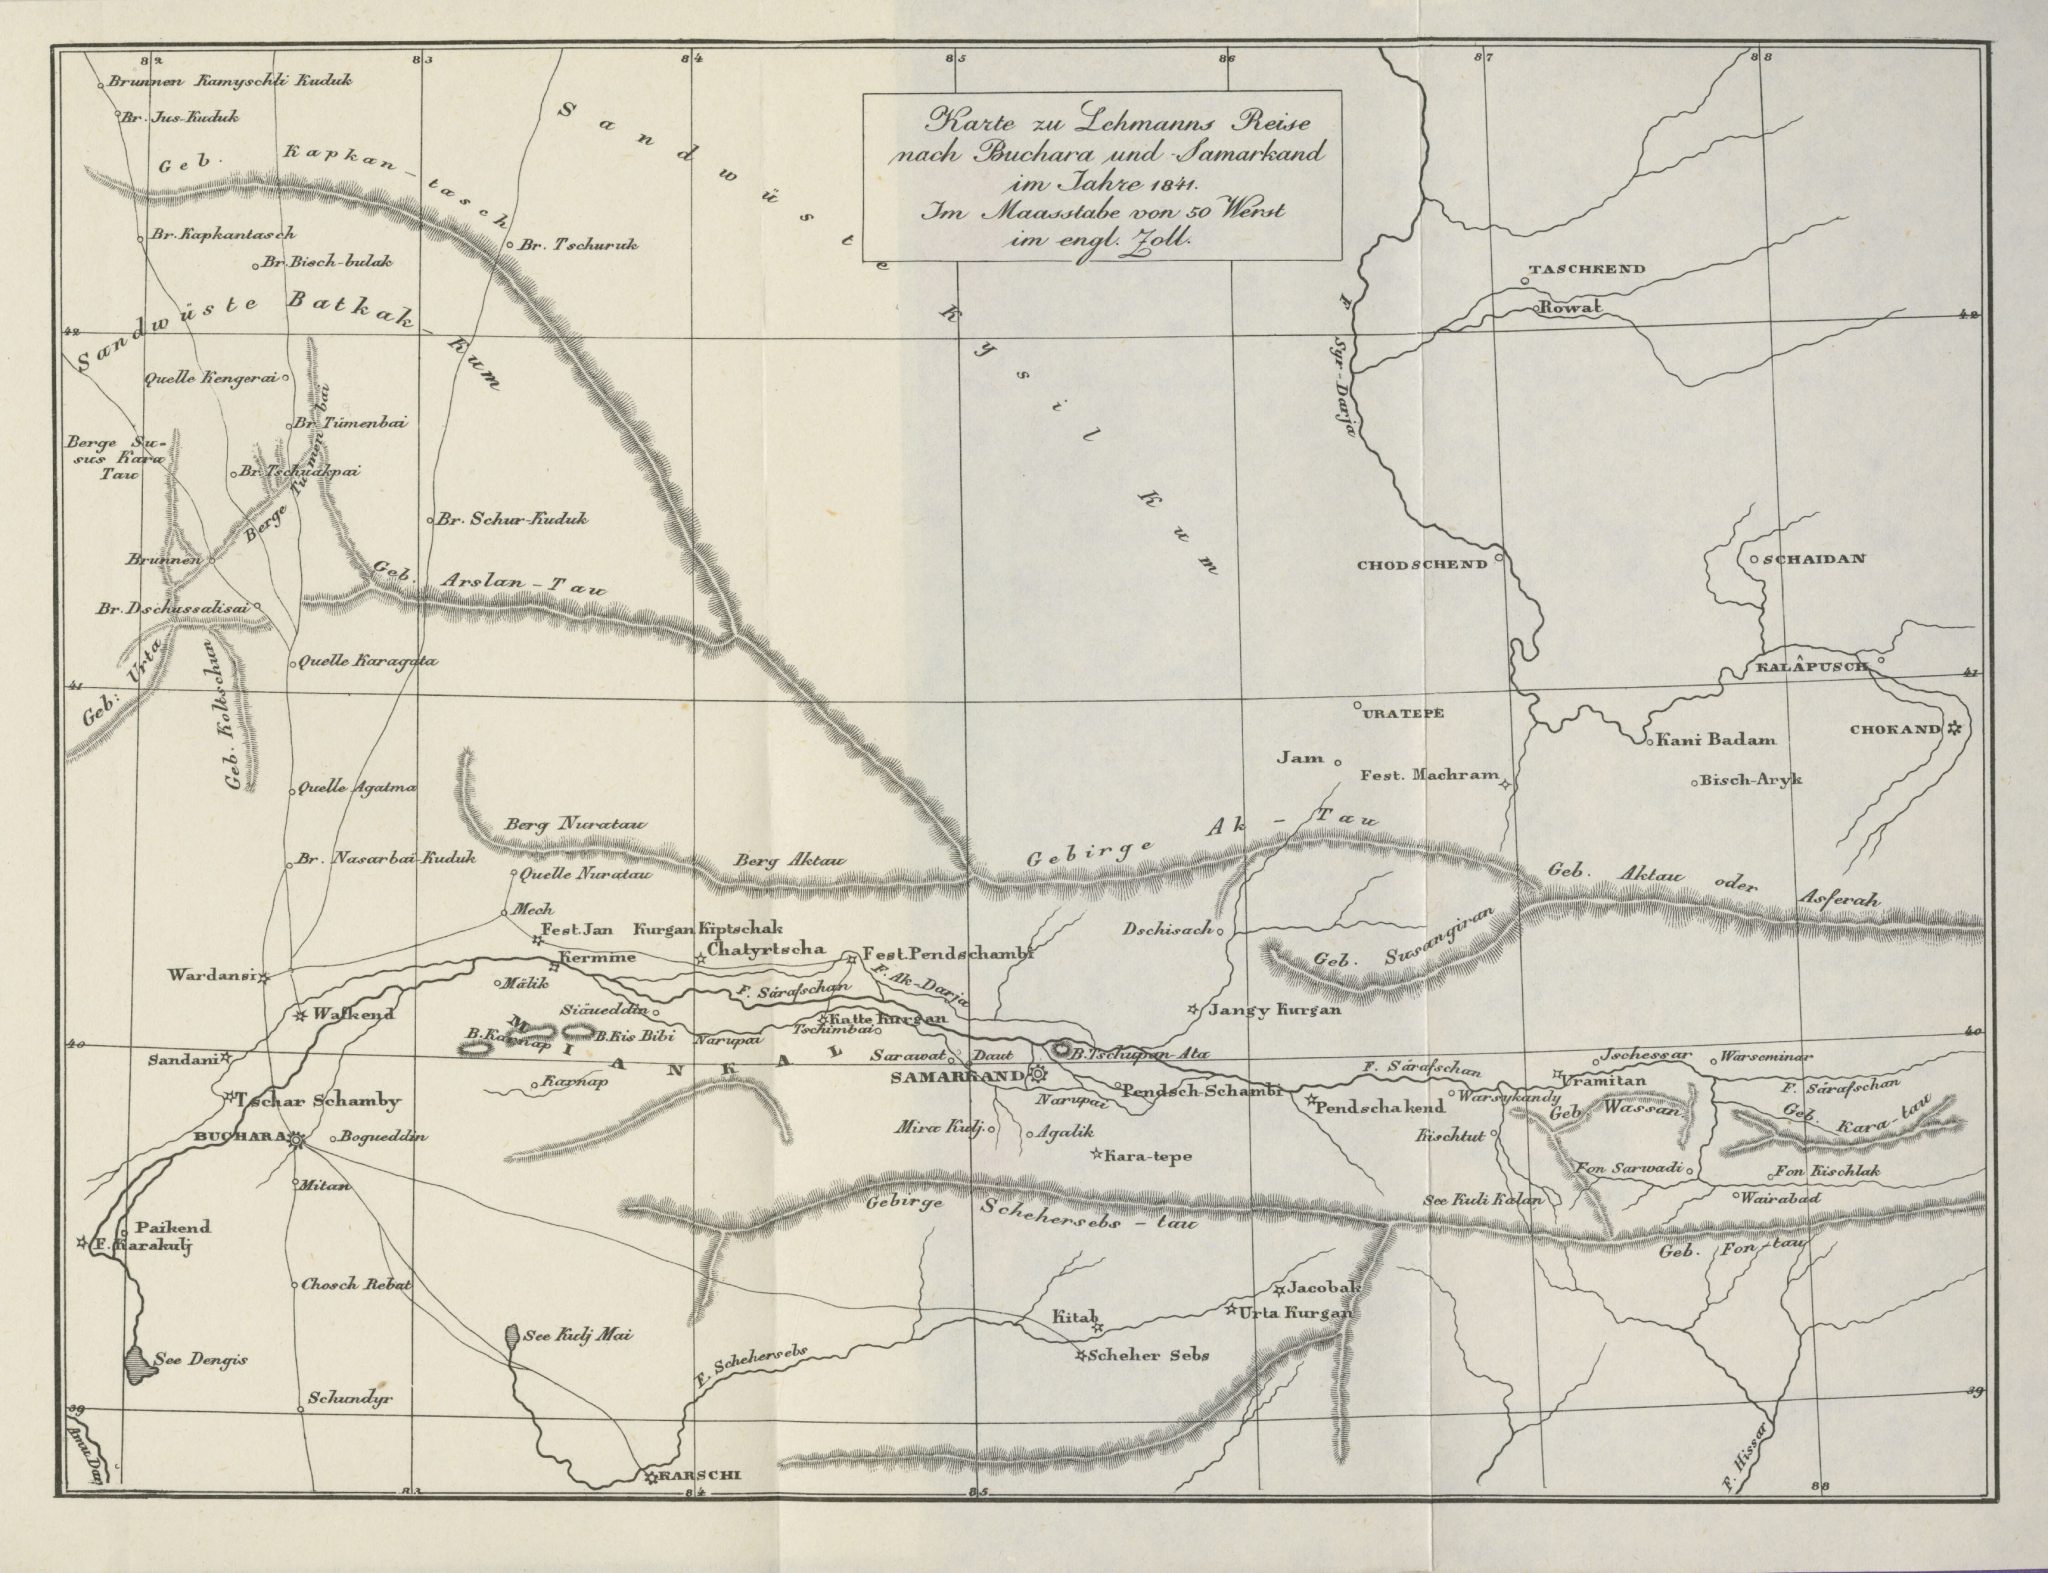 The travel route of Lehmanns to Bukhara and Samarkand in 1841